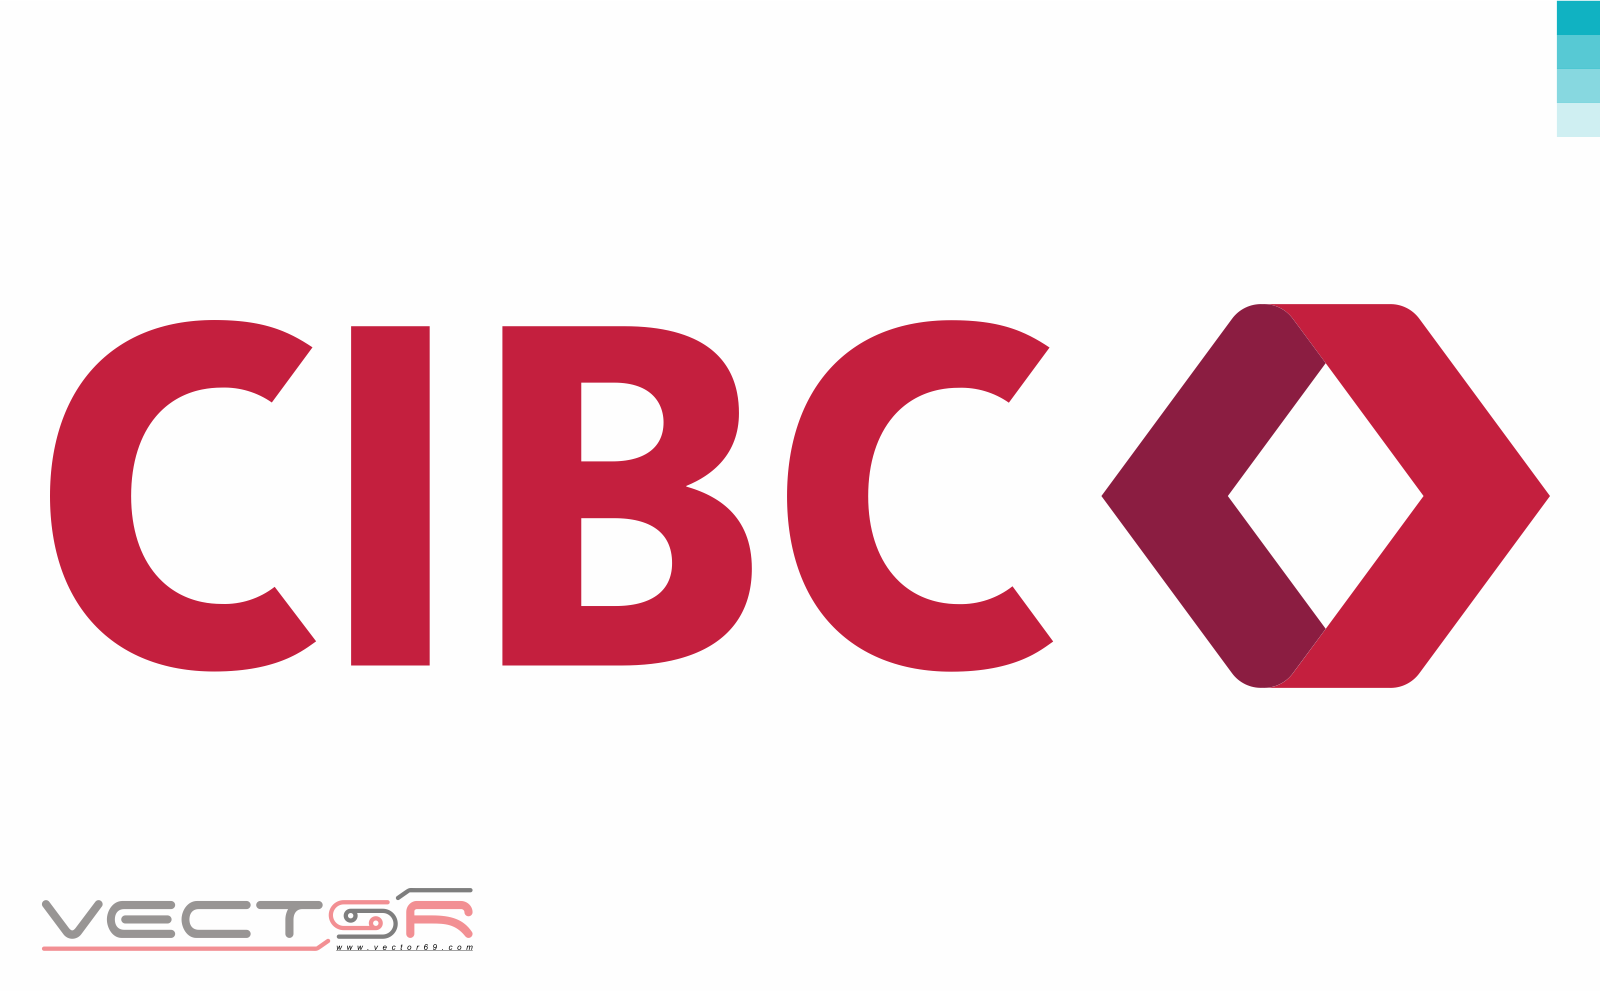 CIBC (Canadian Imperial Bank of Commerce) Logo - Download Vector File SVG (Scalable Vector Graphics)